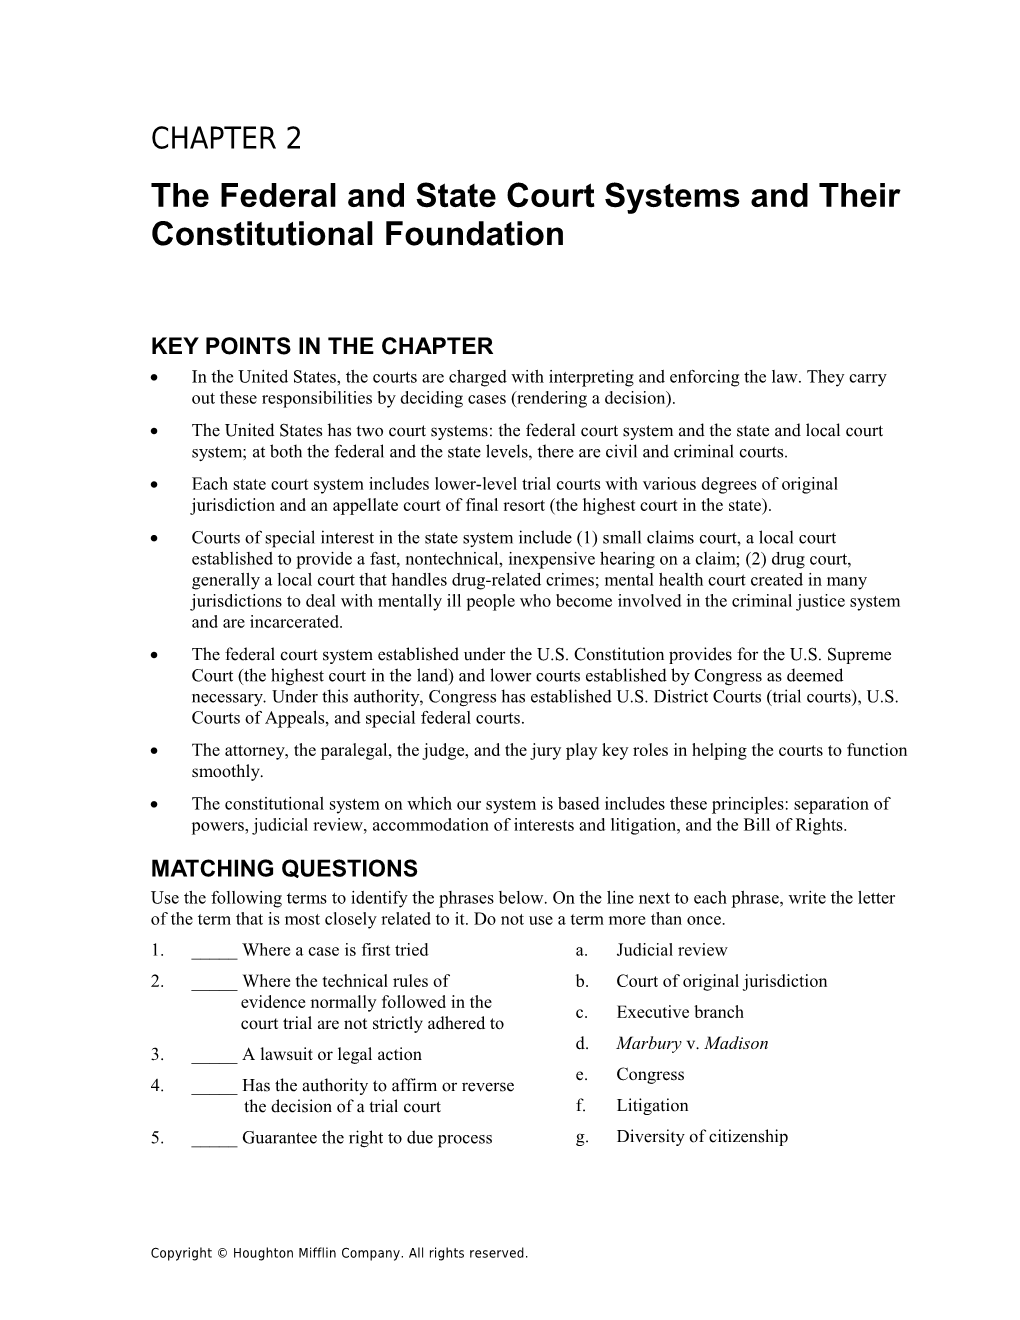 Chapter 2: the Federal and State Court Systems and Their Constitutional Foundation 1